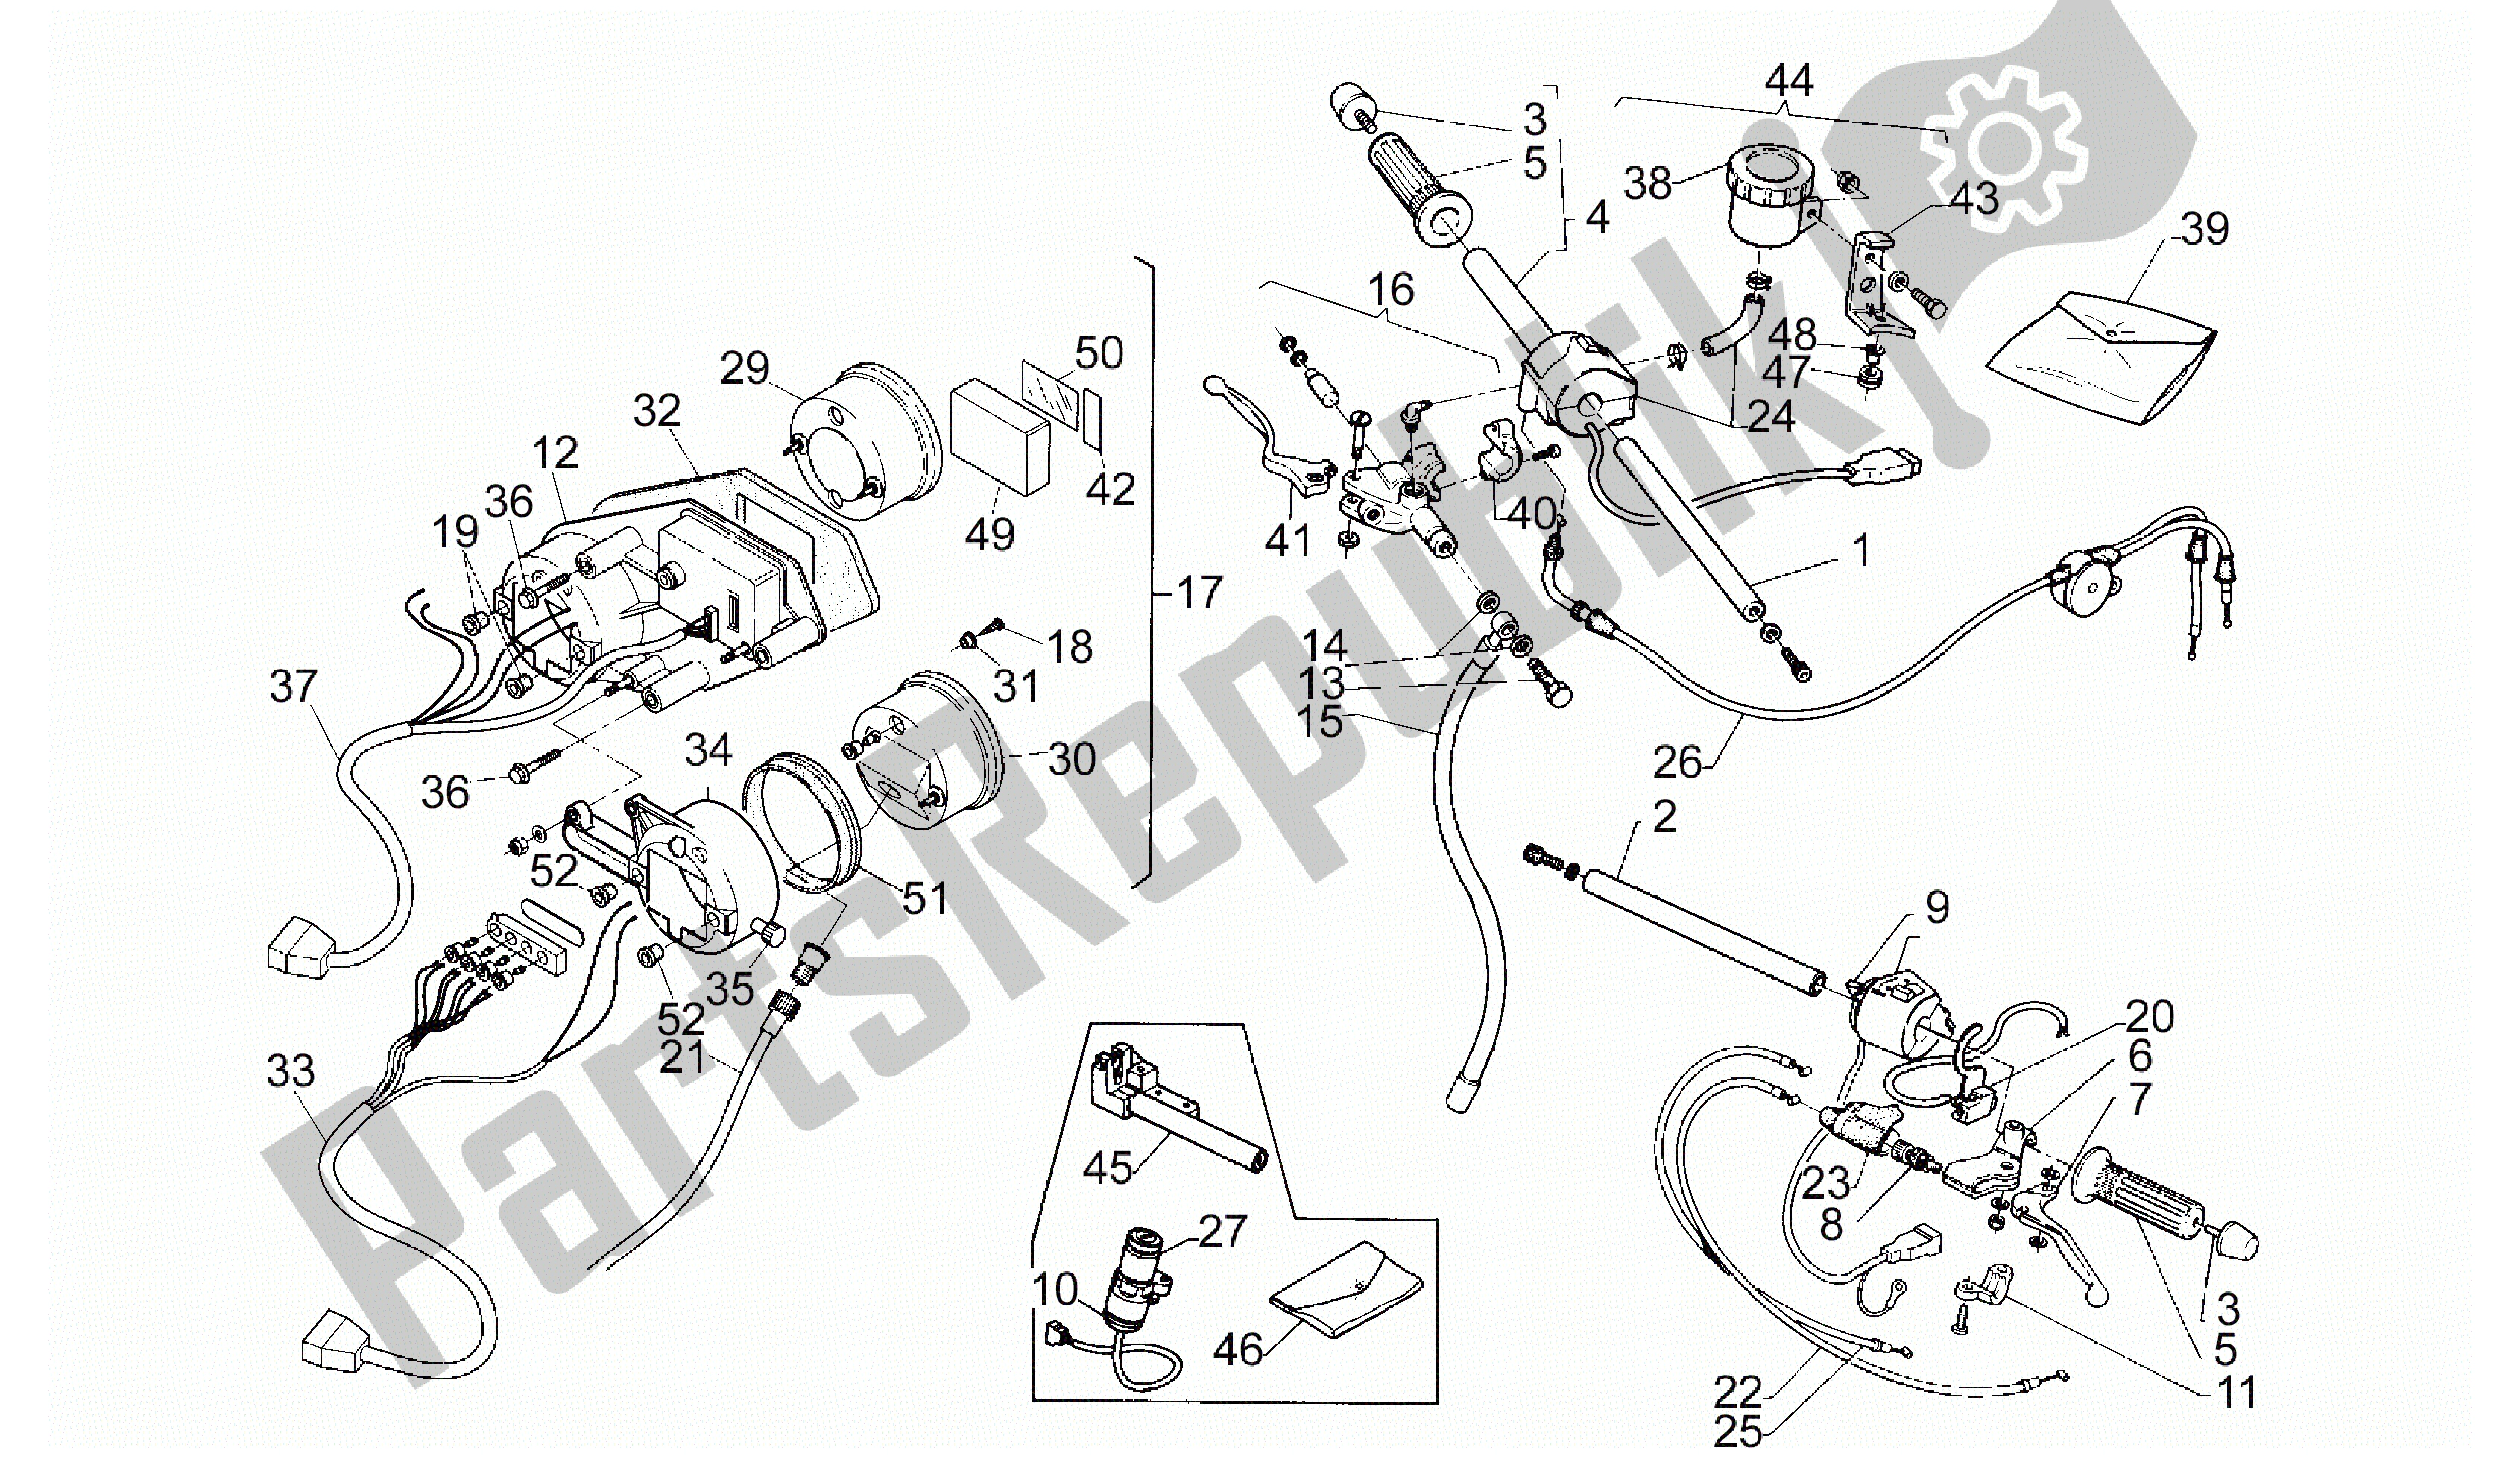 All parts for the Handlebar - Controls of the Aprilia RS 125 1995